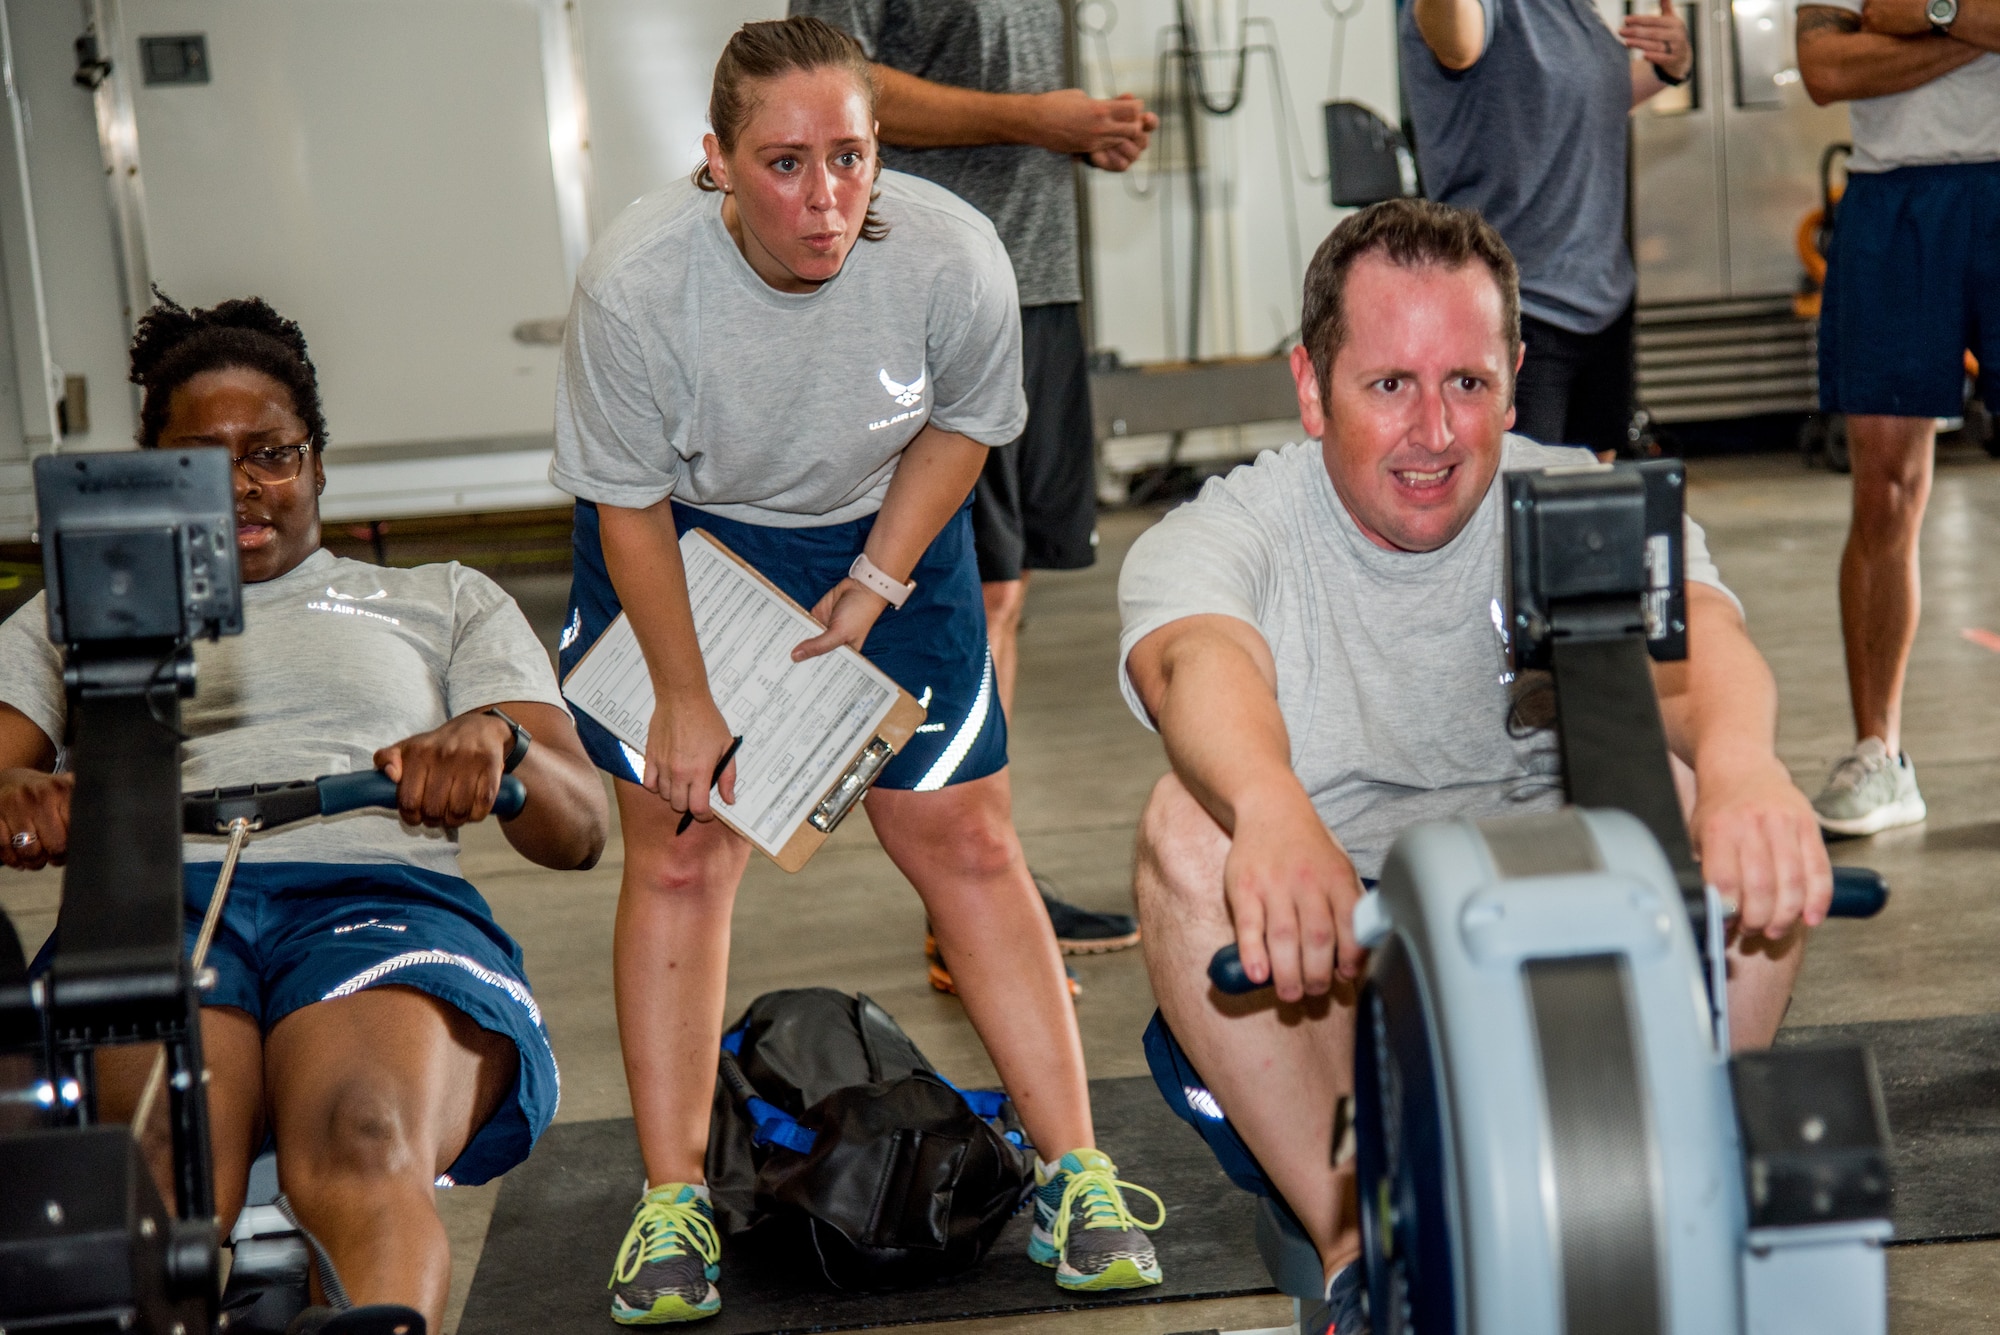 Explosive Ordnance Disposal Airmen perform the Row Ergometer 1,000 meter component of the EOD Tier 2 Physical Fitness Test Prototype at Dover Air Force Base, Del., Aug. 8, 2018. The Row Ergometer 1,000 meter measures the muscular endurance, anaerobic capacity and cardiorespiratory endurance of EOD technicians. (U.S. Air Force photo by Staff Sgt. Damien Taylor)